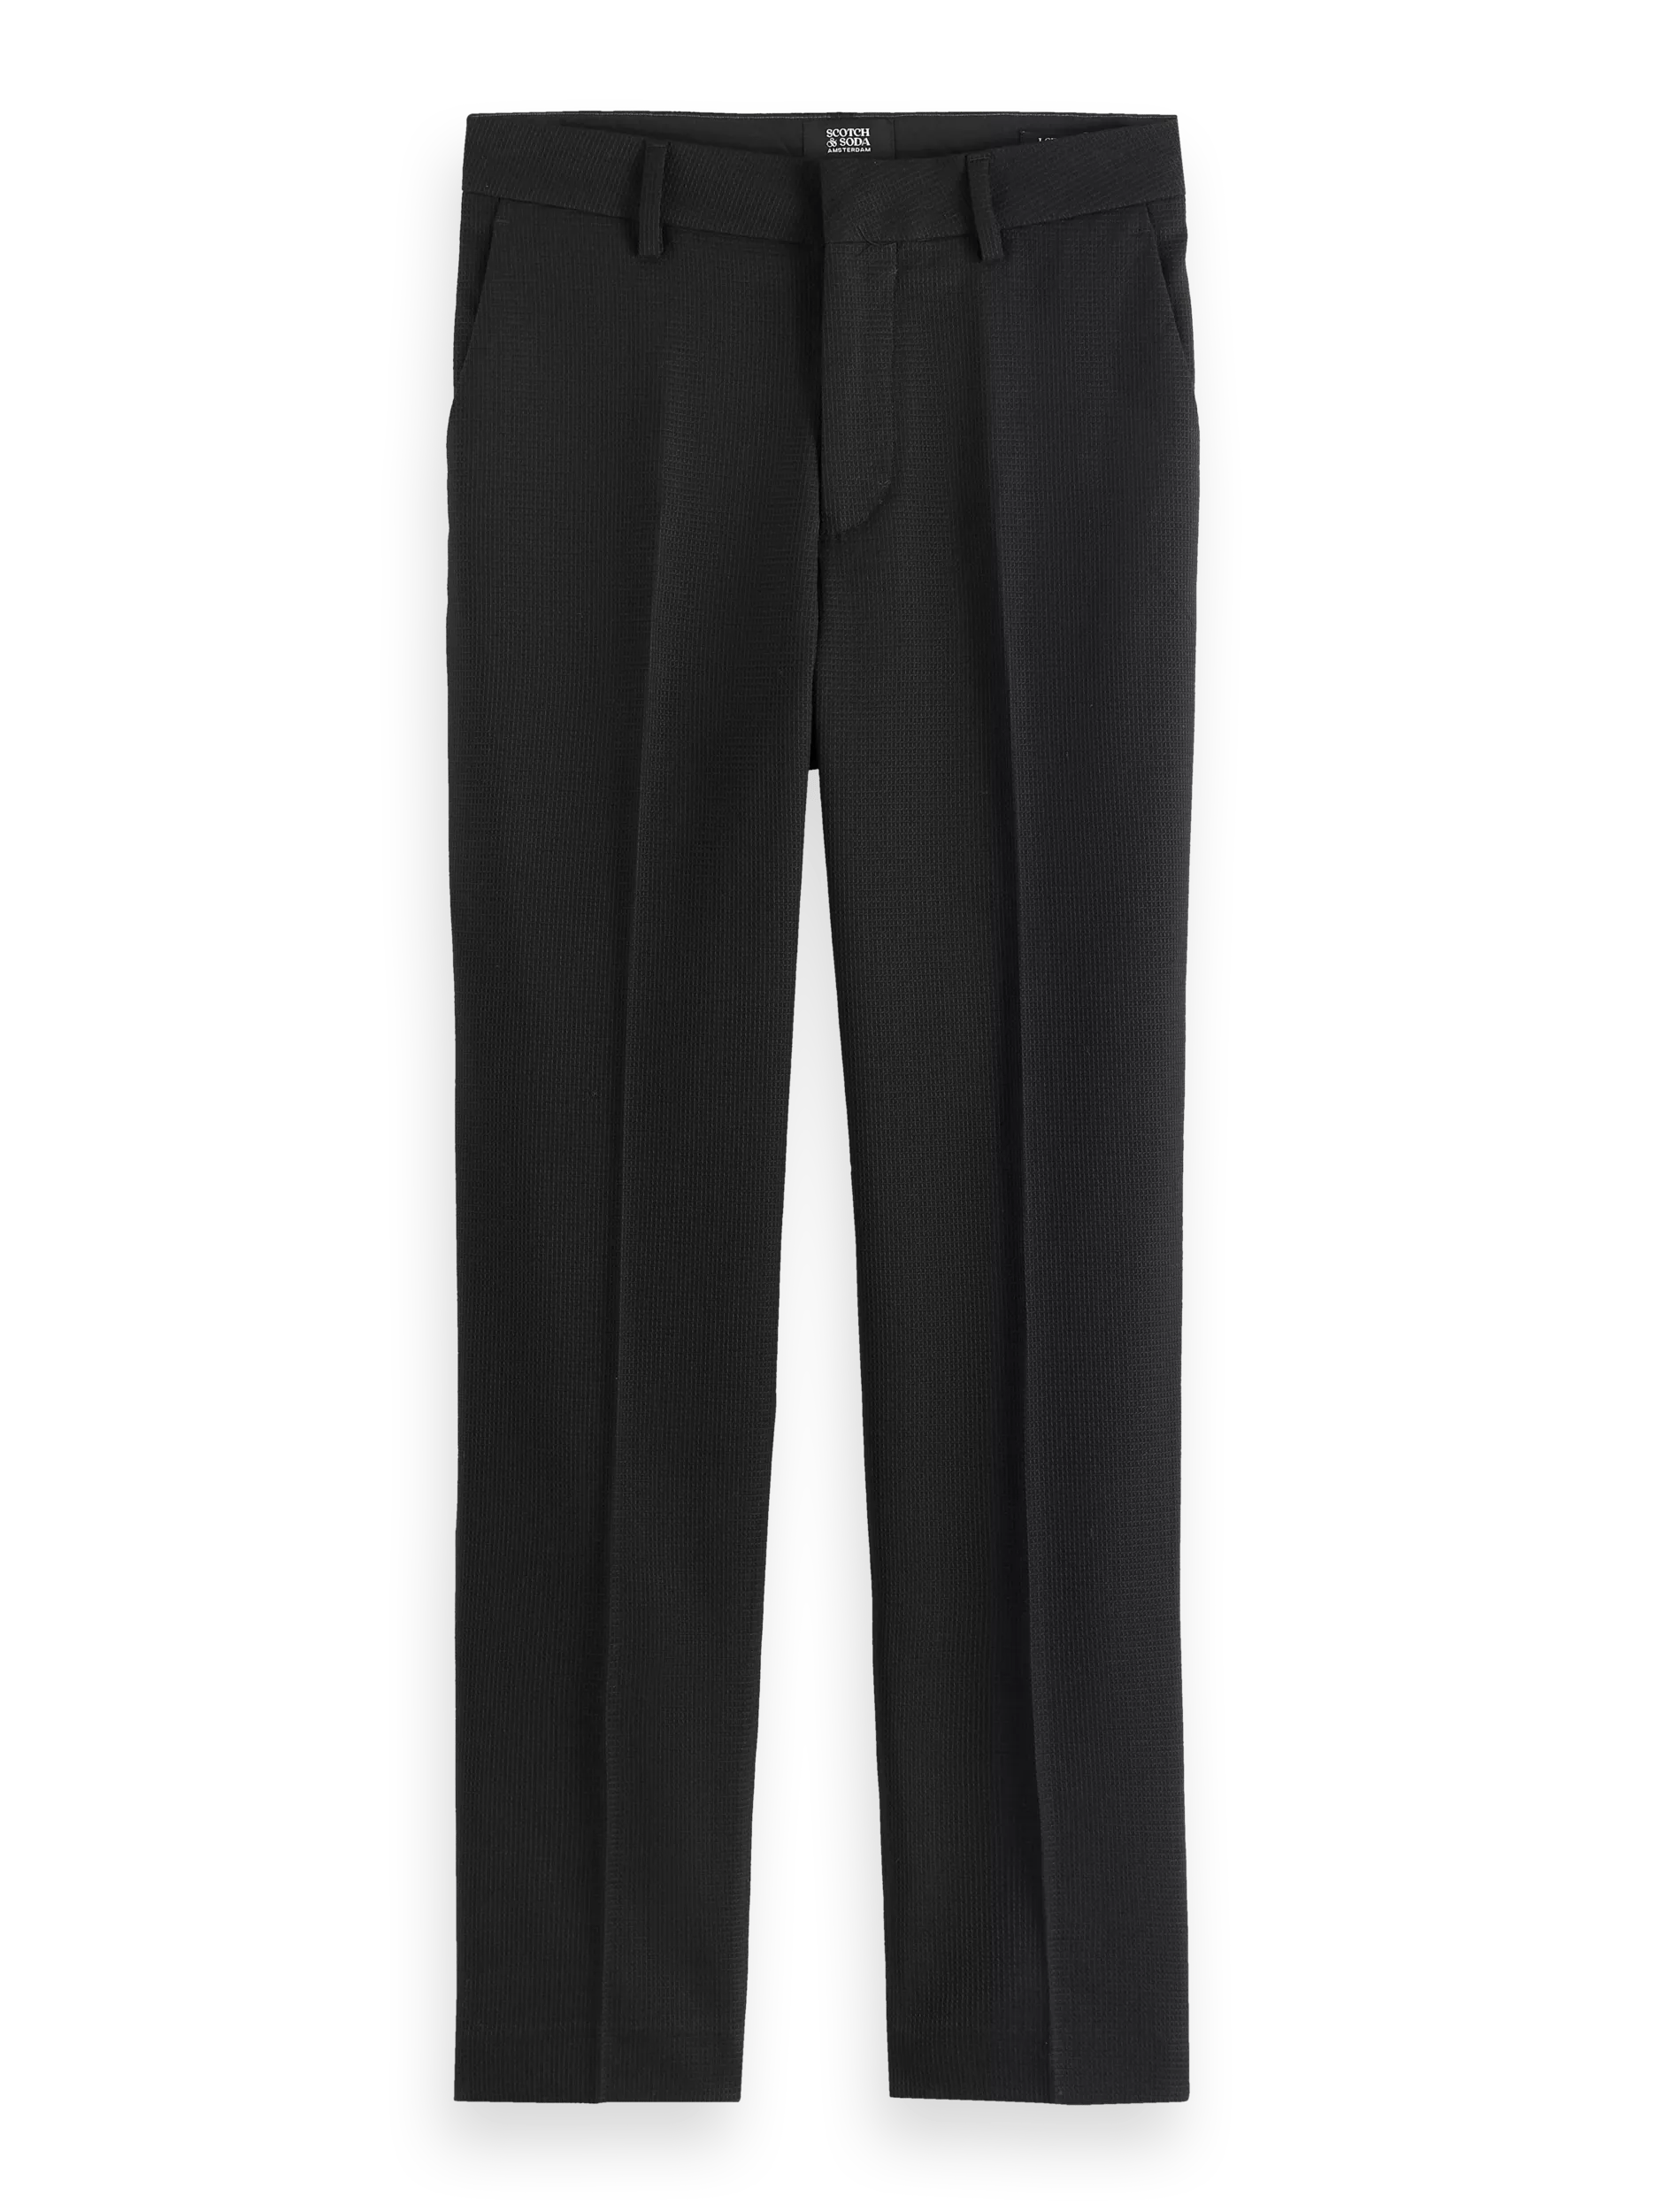 Scotch & Soda The Lowry mid-rise slim fit trousers FNT